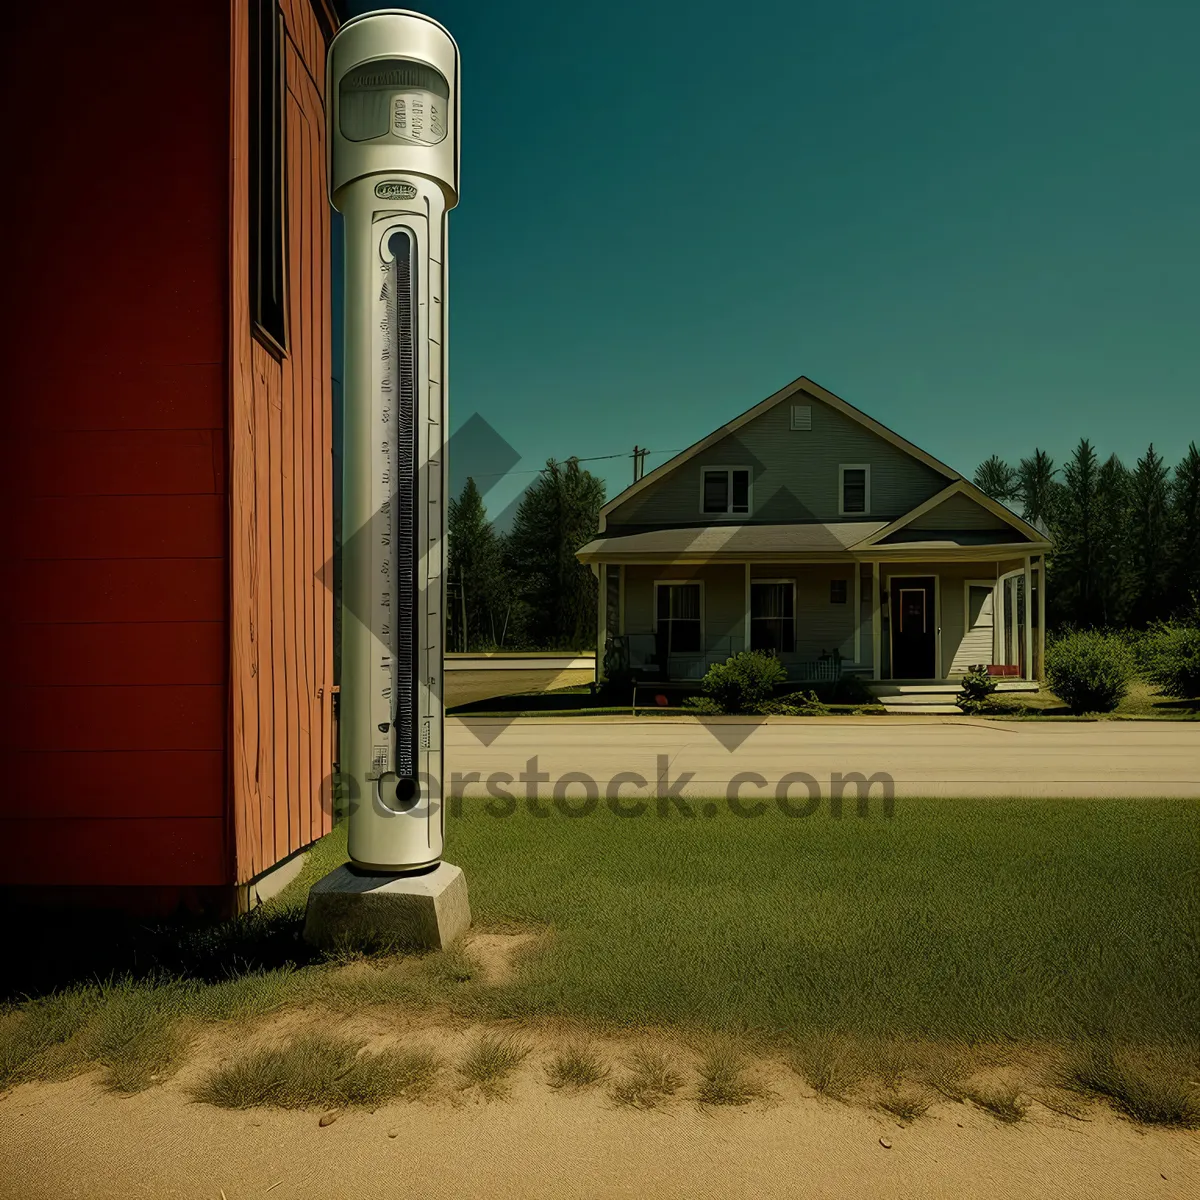 Picture of Rustic Residential Home with Gas Pump